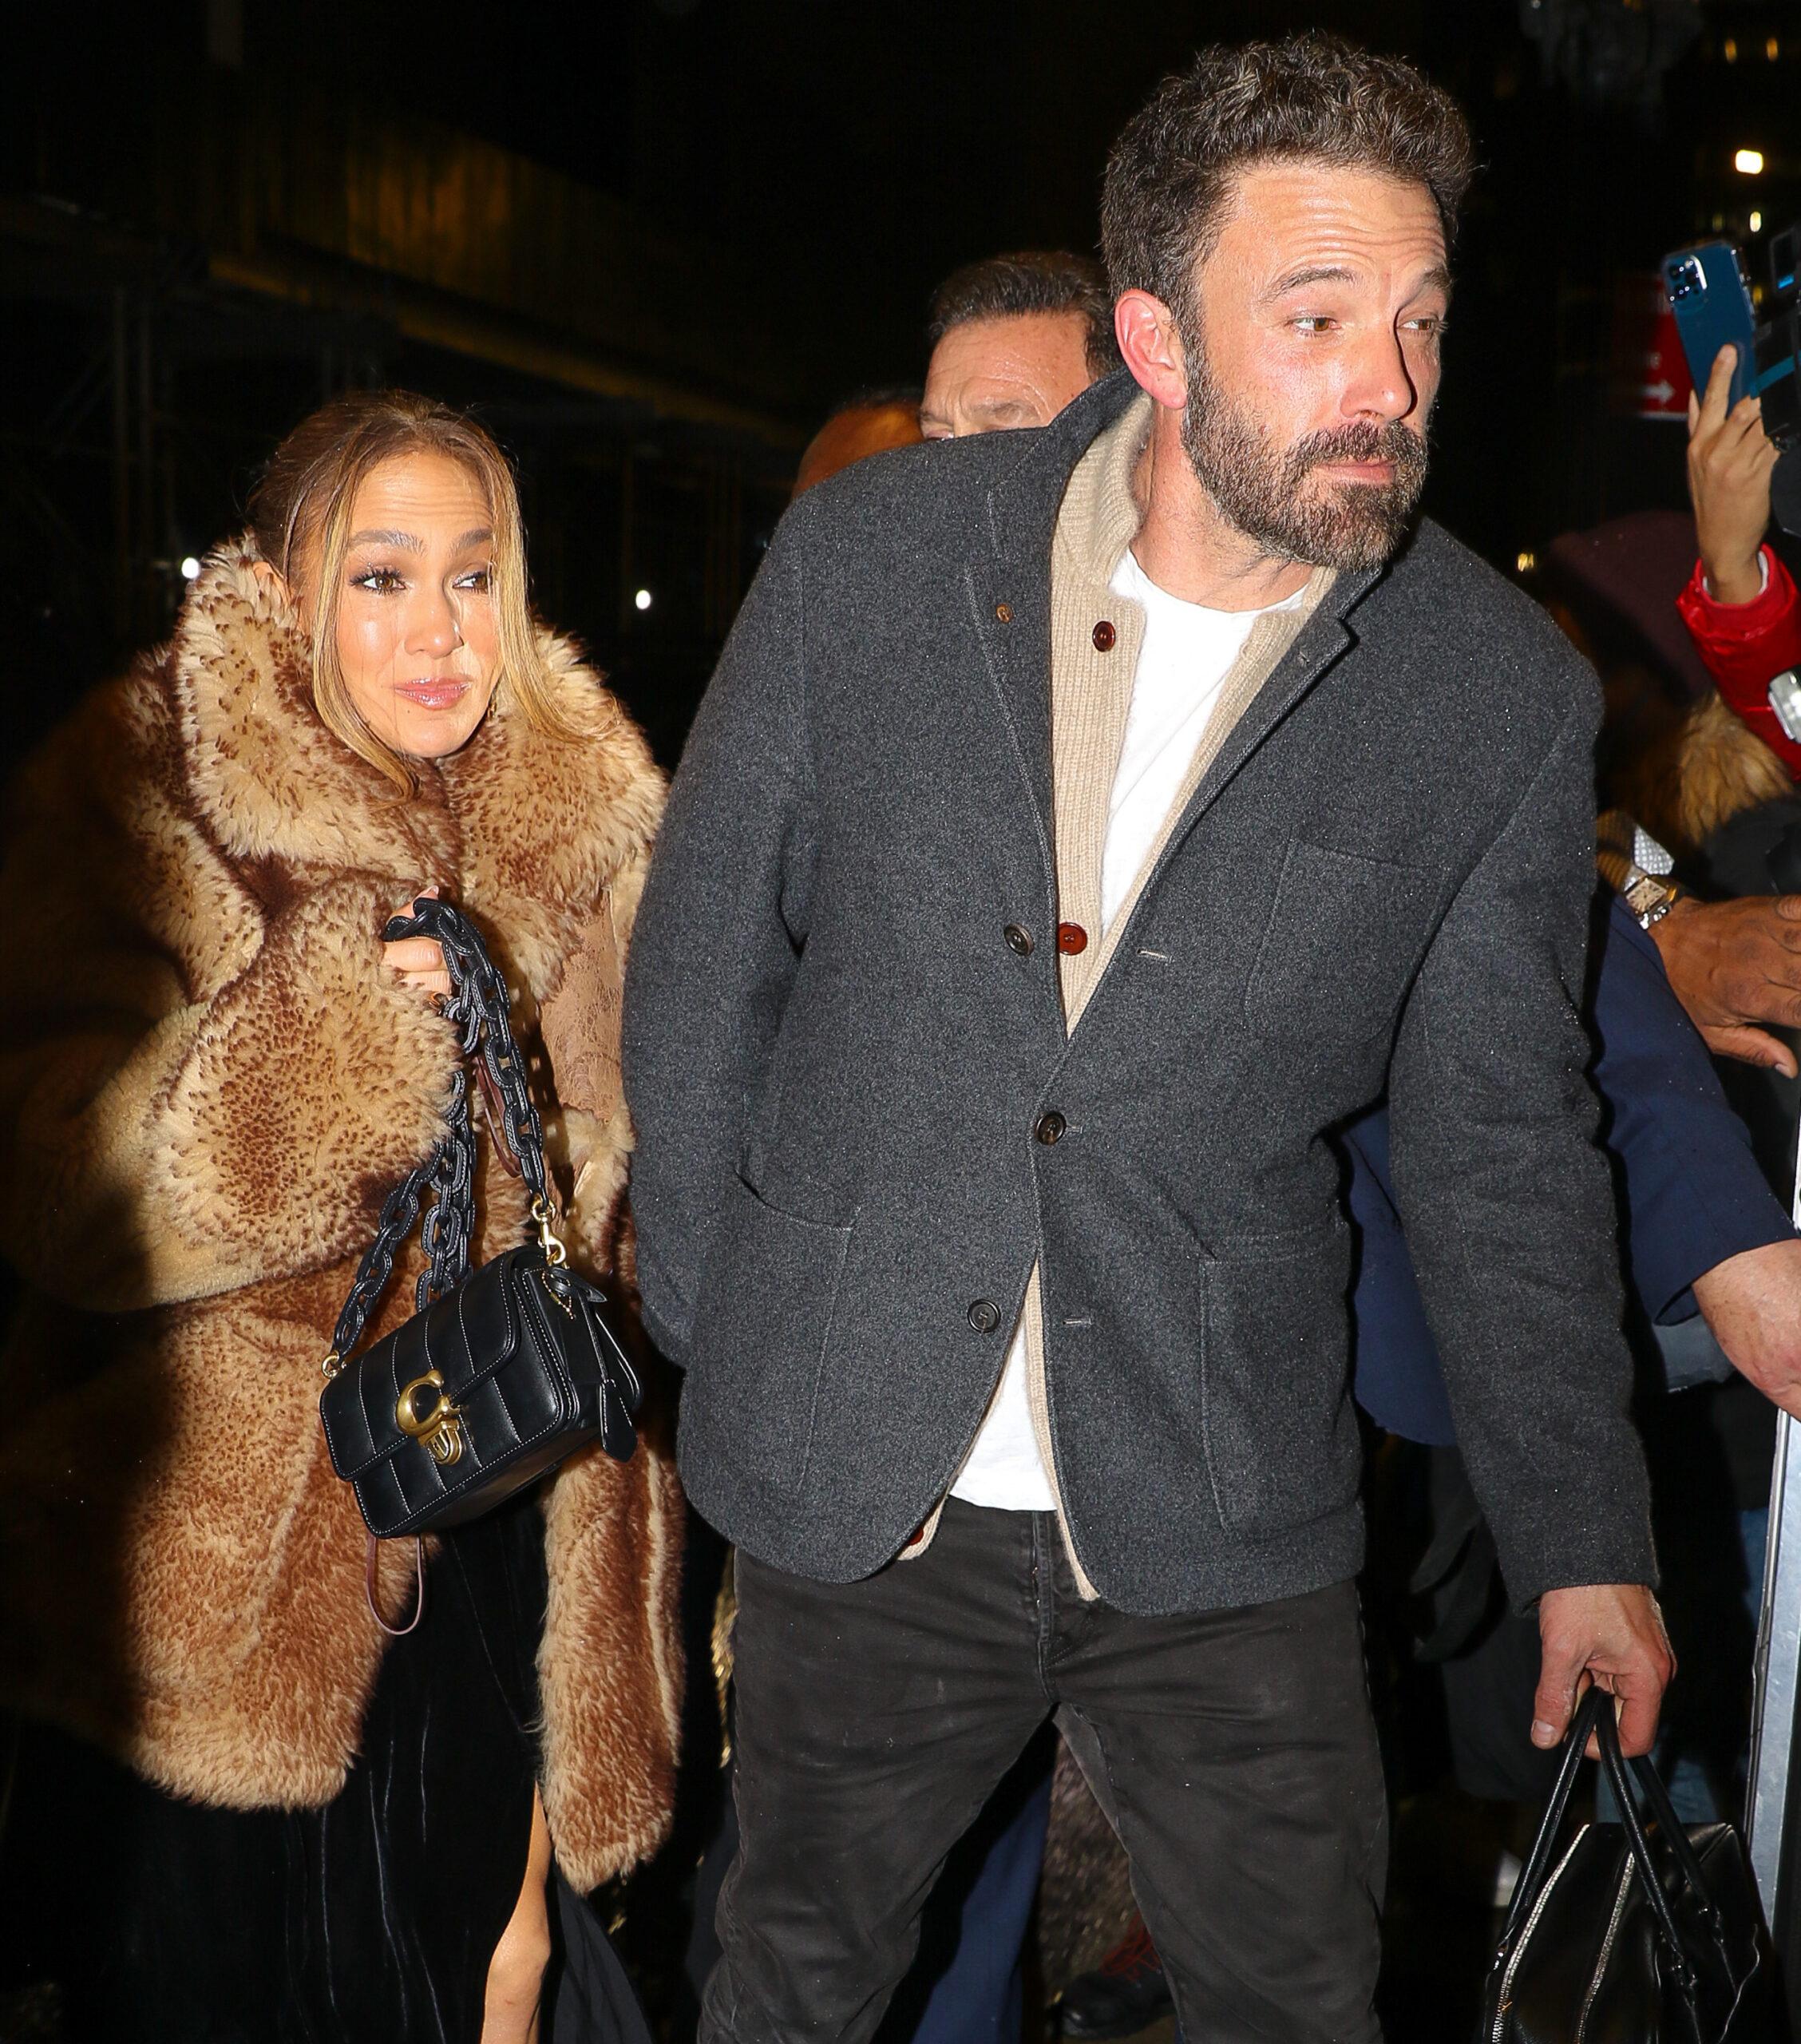 Jennifer Lopez and Ben Affleck at their hotel in New York City